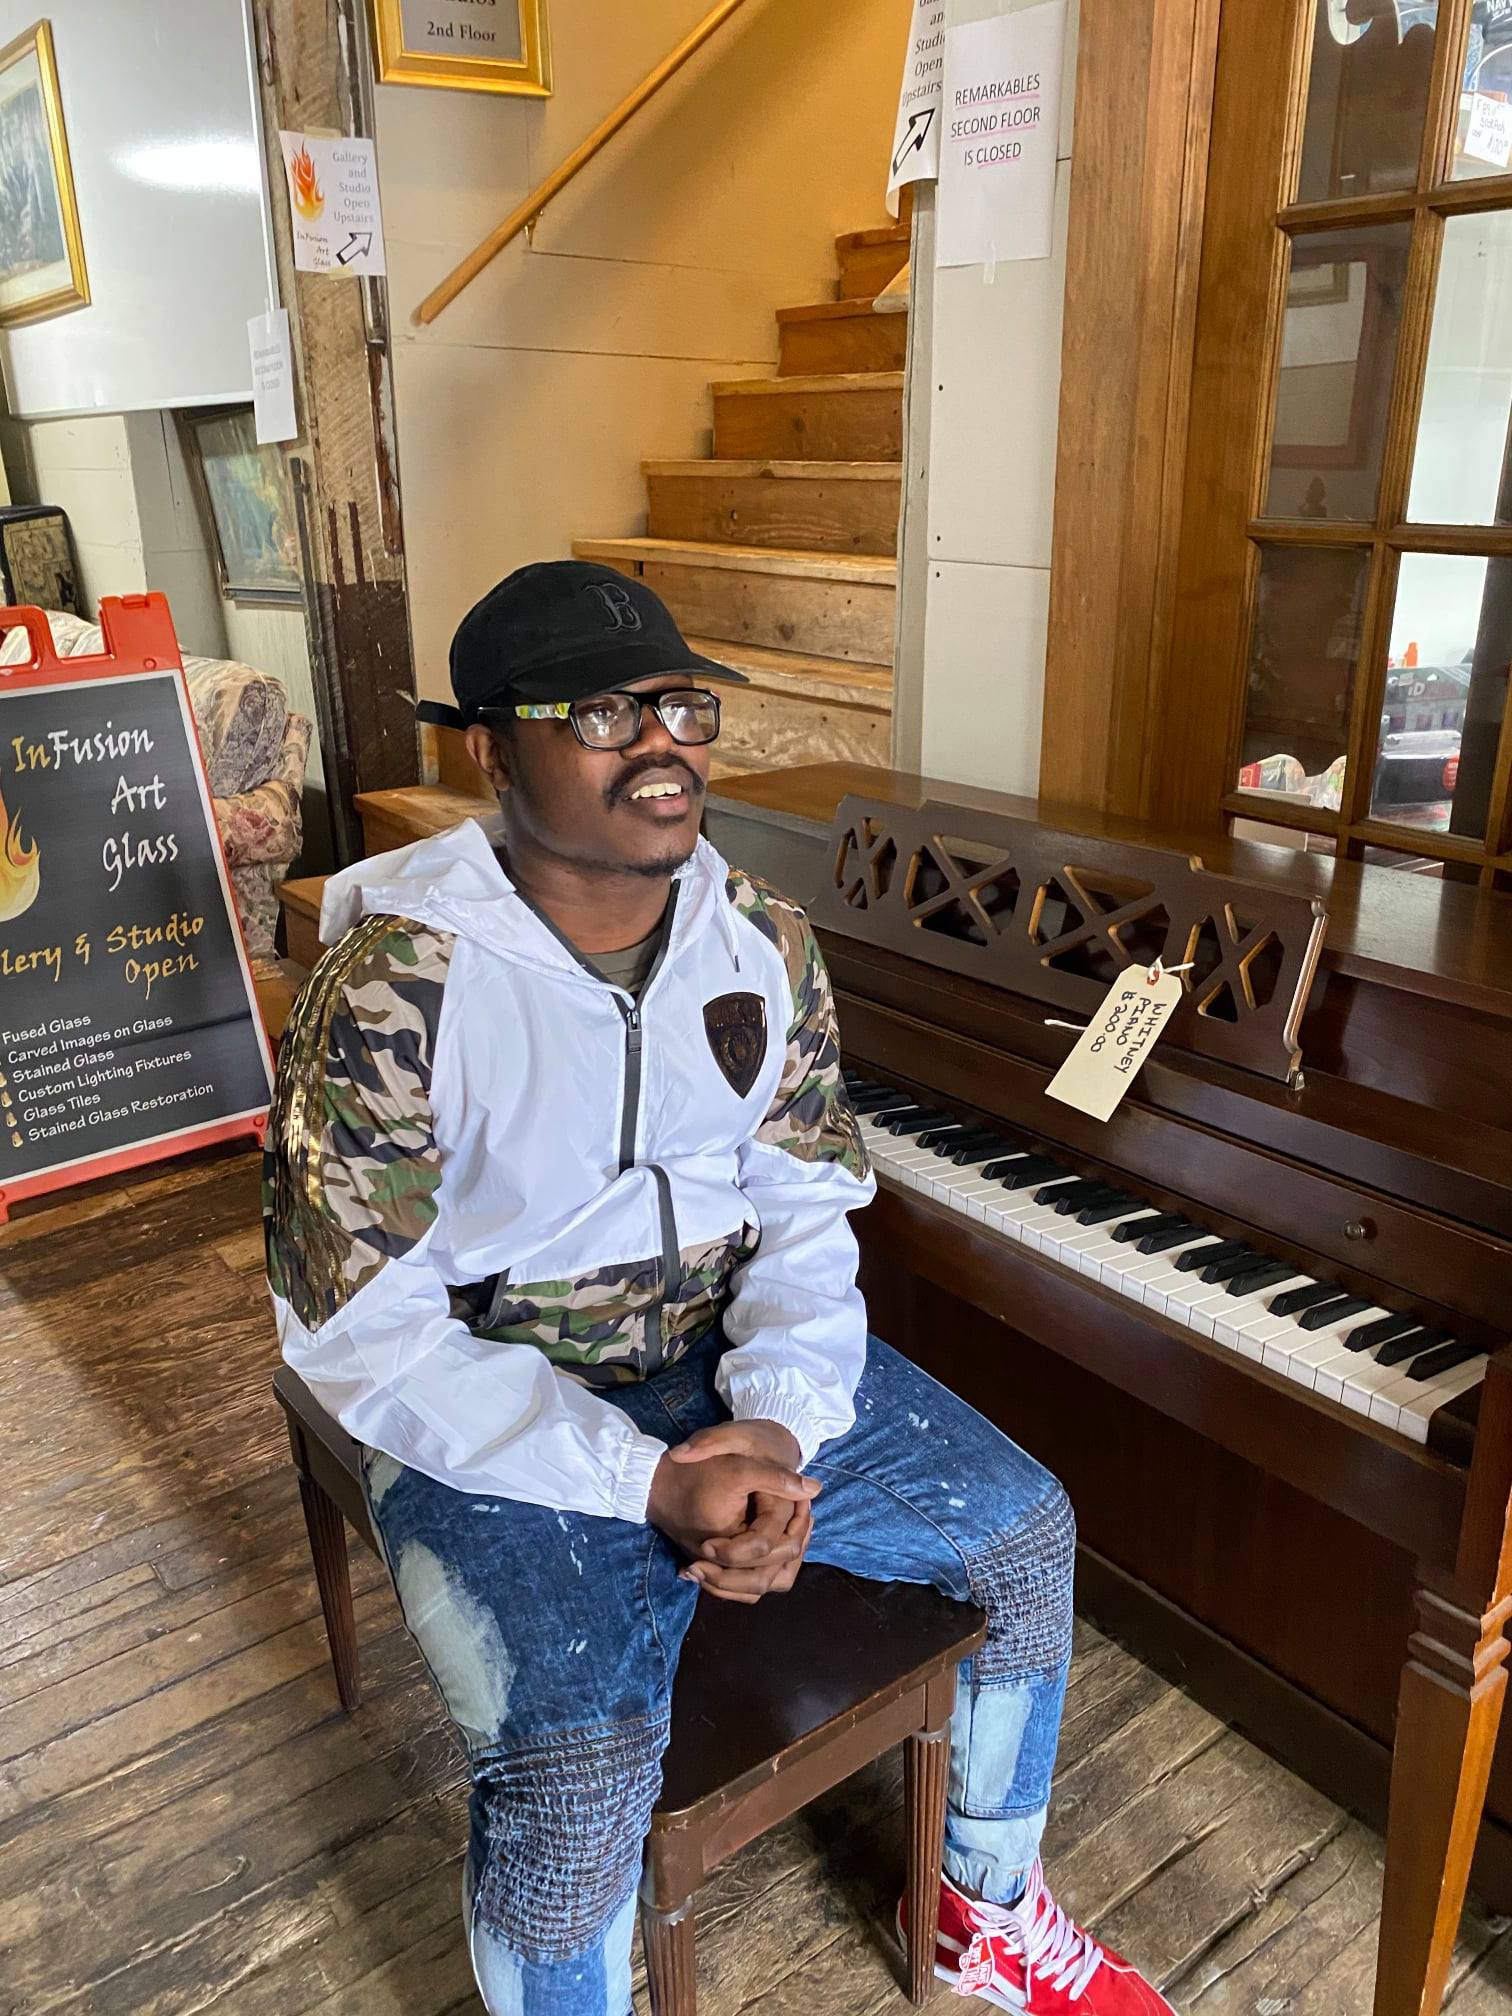 PHOTO: On July 11, 23-year-old John Thomas Archer asked employees at ReMARKable Cleanouts in Norwood, Massachusetts, permission to play a piano that was out on display.